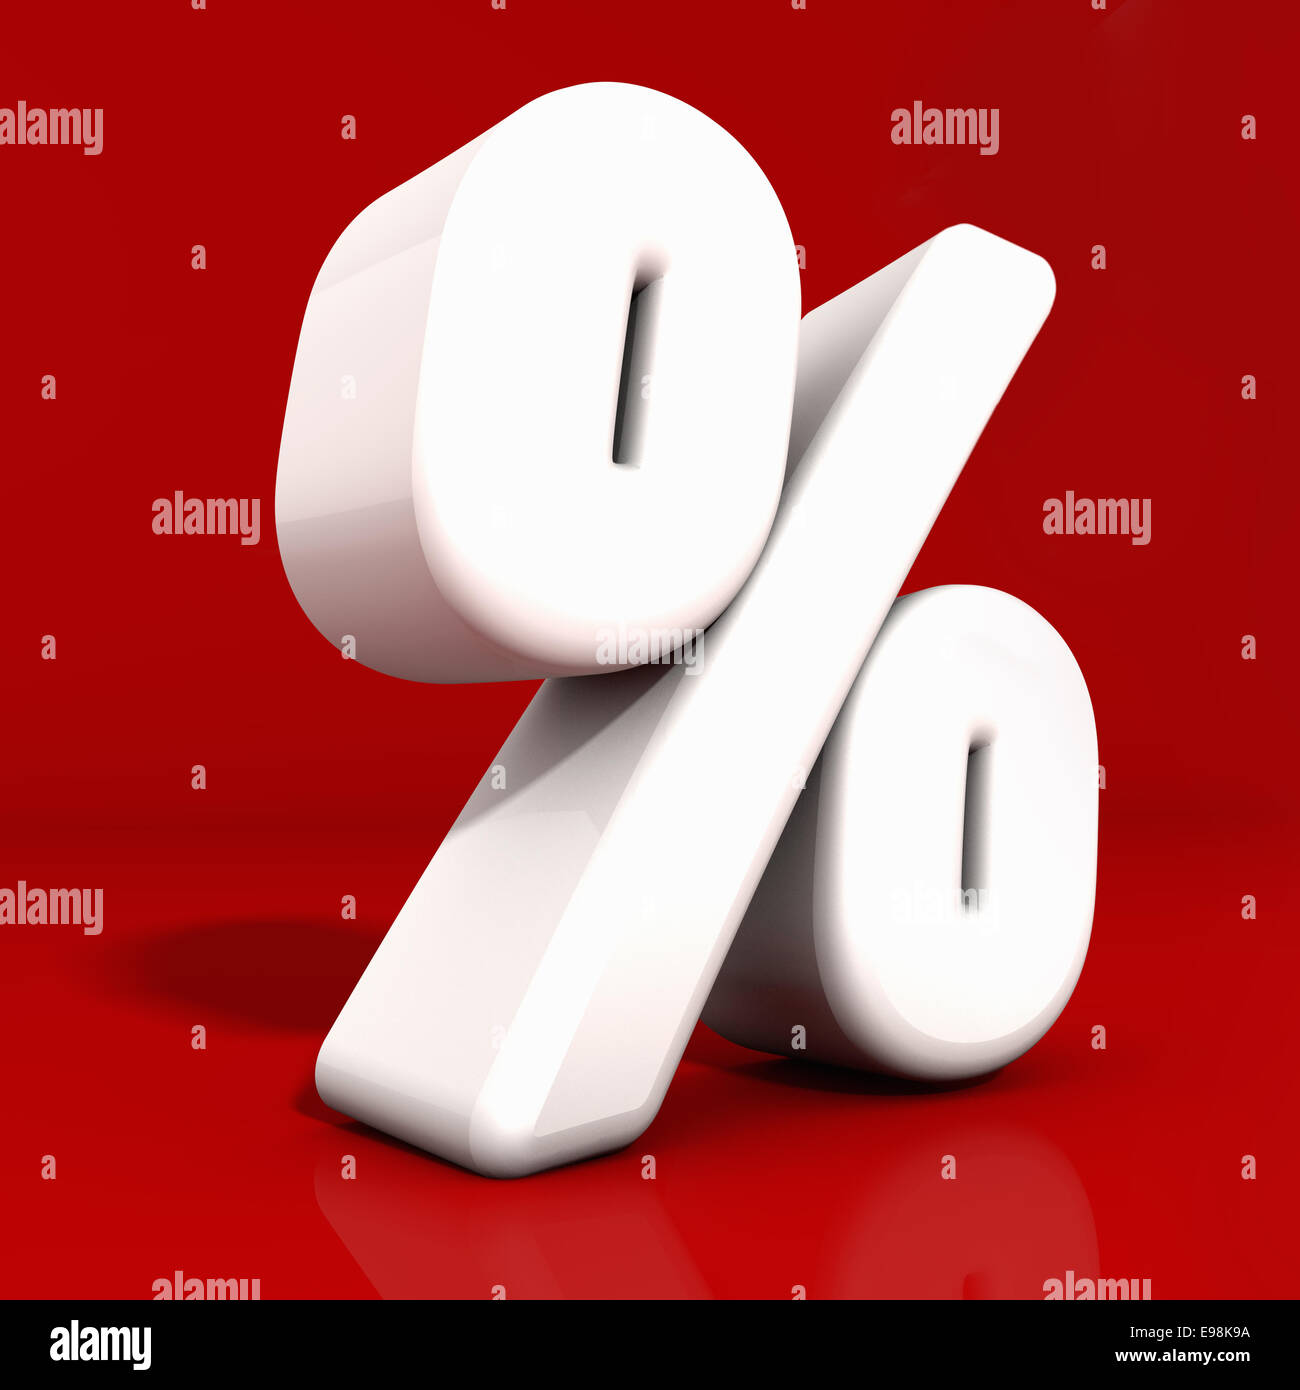 3d white percentage icon with rounded edges and reflection obliquely angled on red Stock Photo